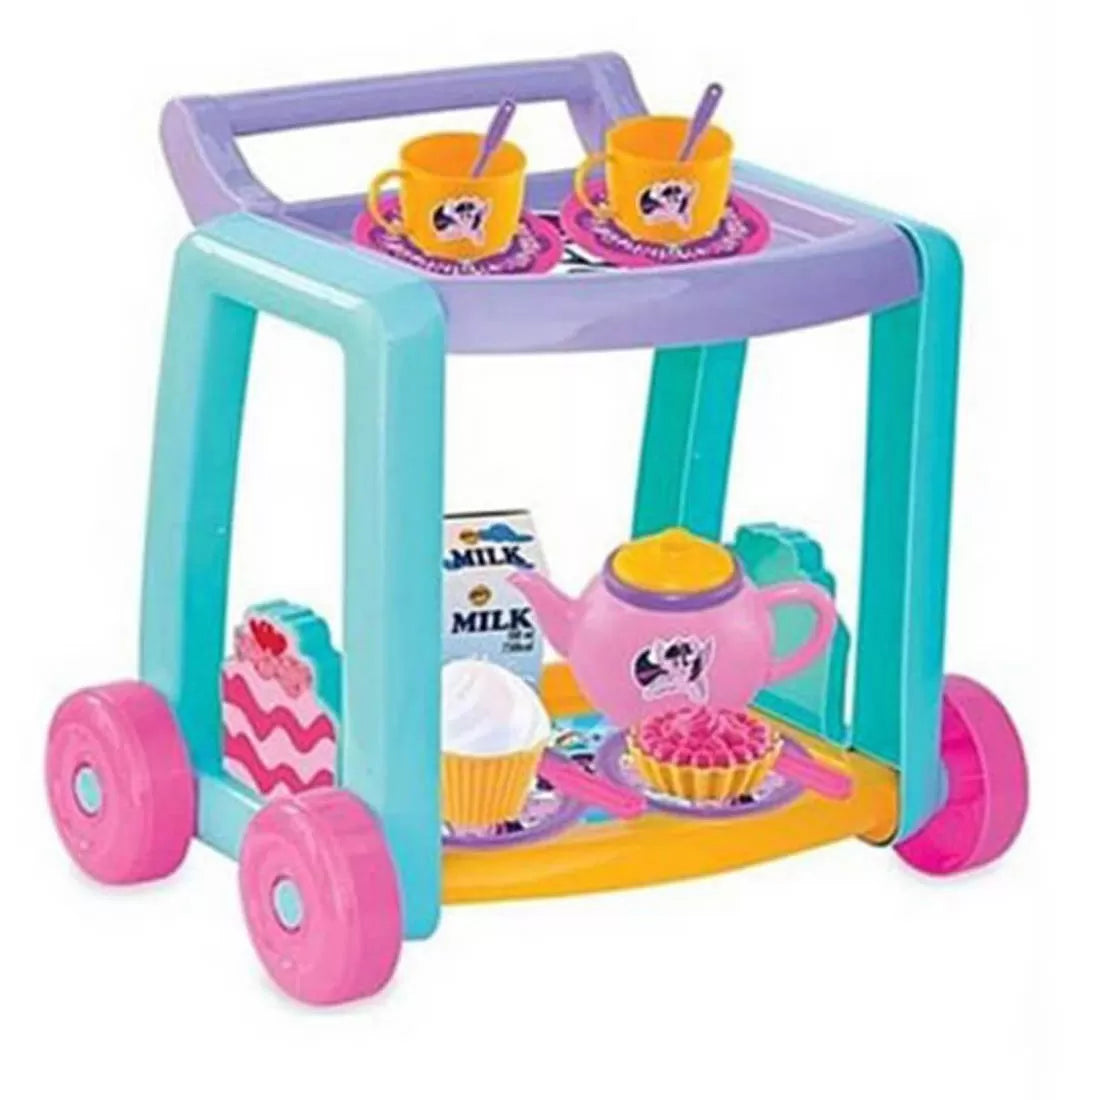 Dede My Little Pony Tea Service Trolley - BumbleToys - 5-7 Years, Cecil, Girls, My Little Pony, Roleplay, Toy House